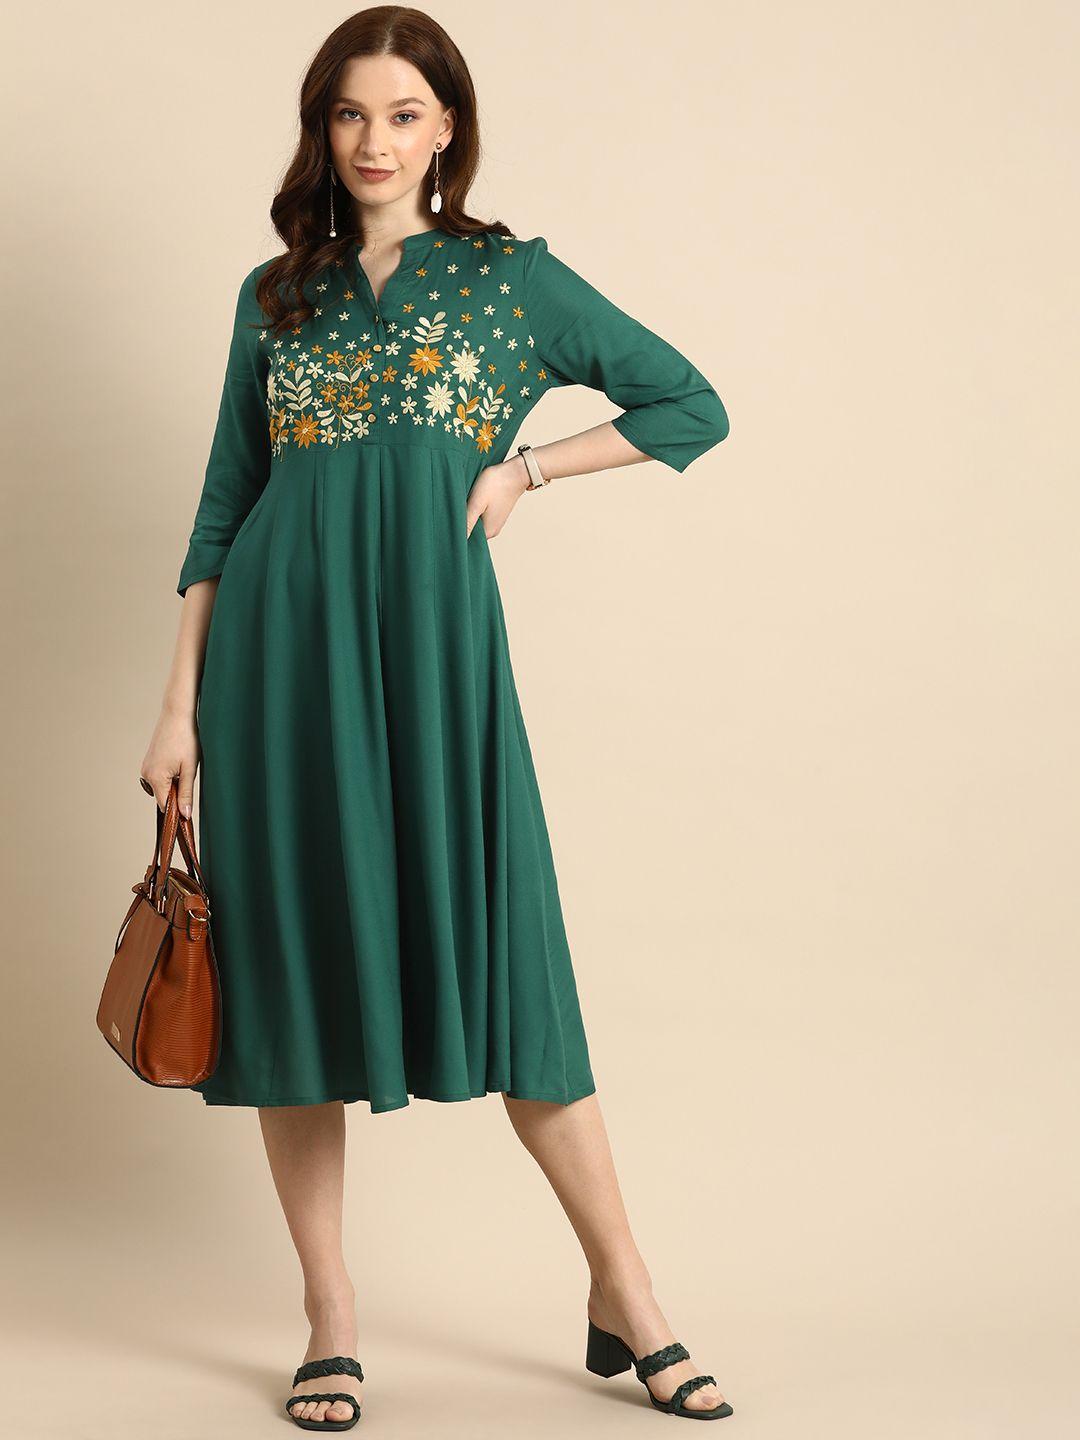 all-about-you-green-&-beige-floral-embroidered-a-line-midi-dress